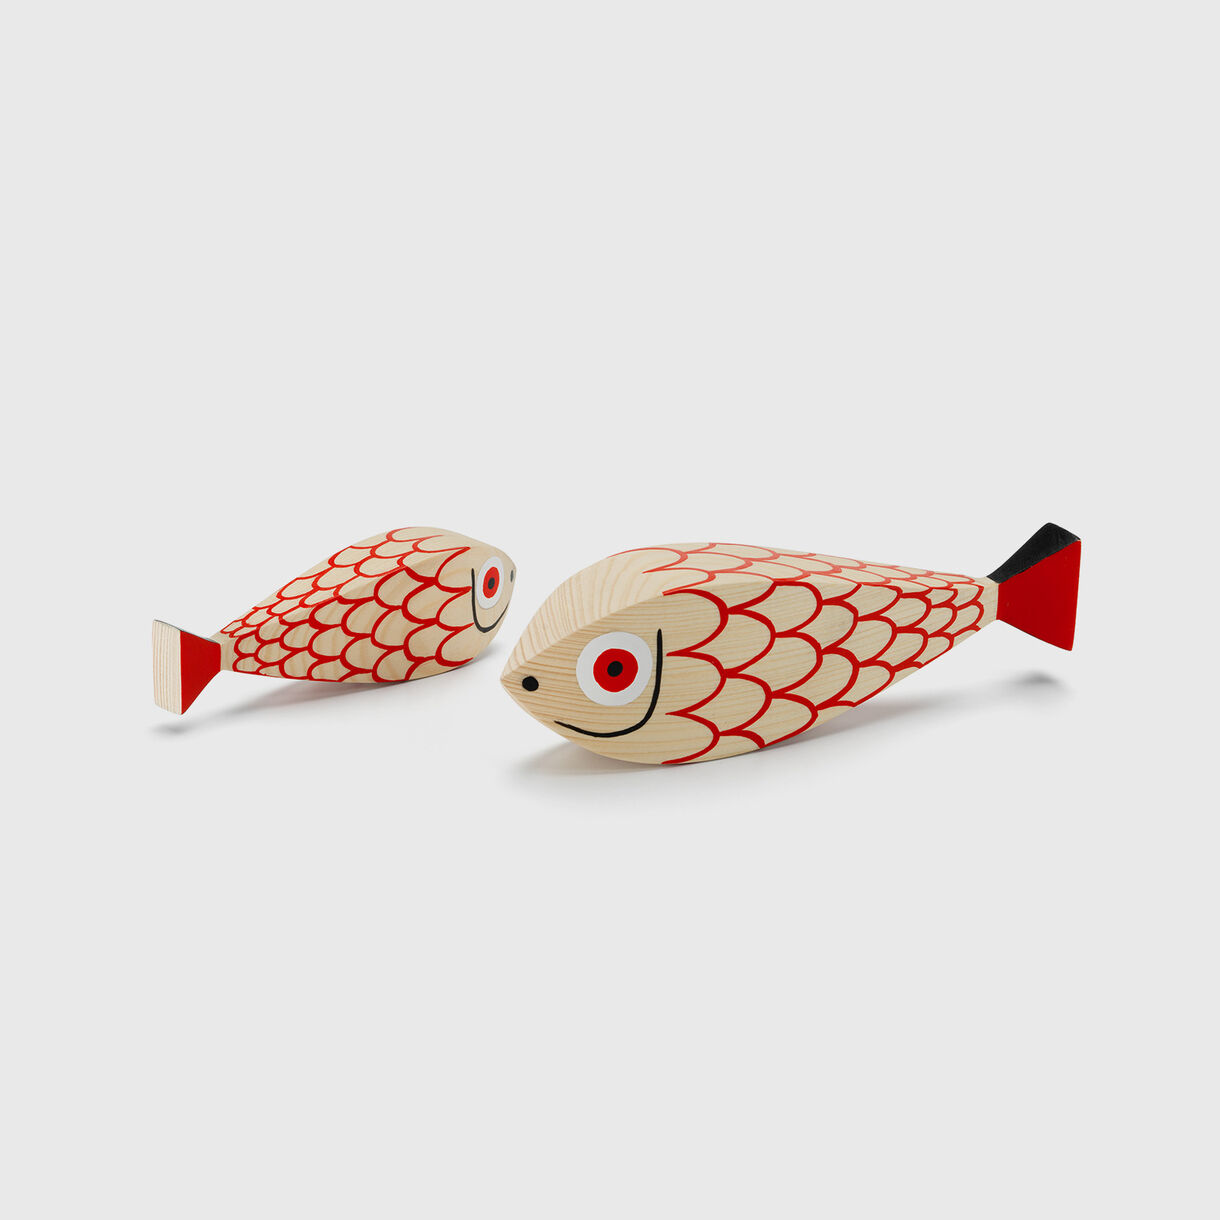 Wooden Dolls, Mother & Child Fish